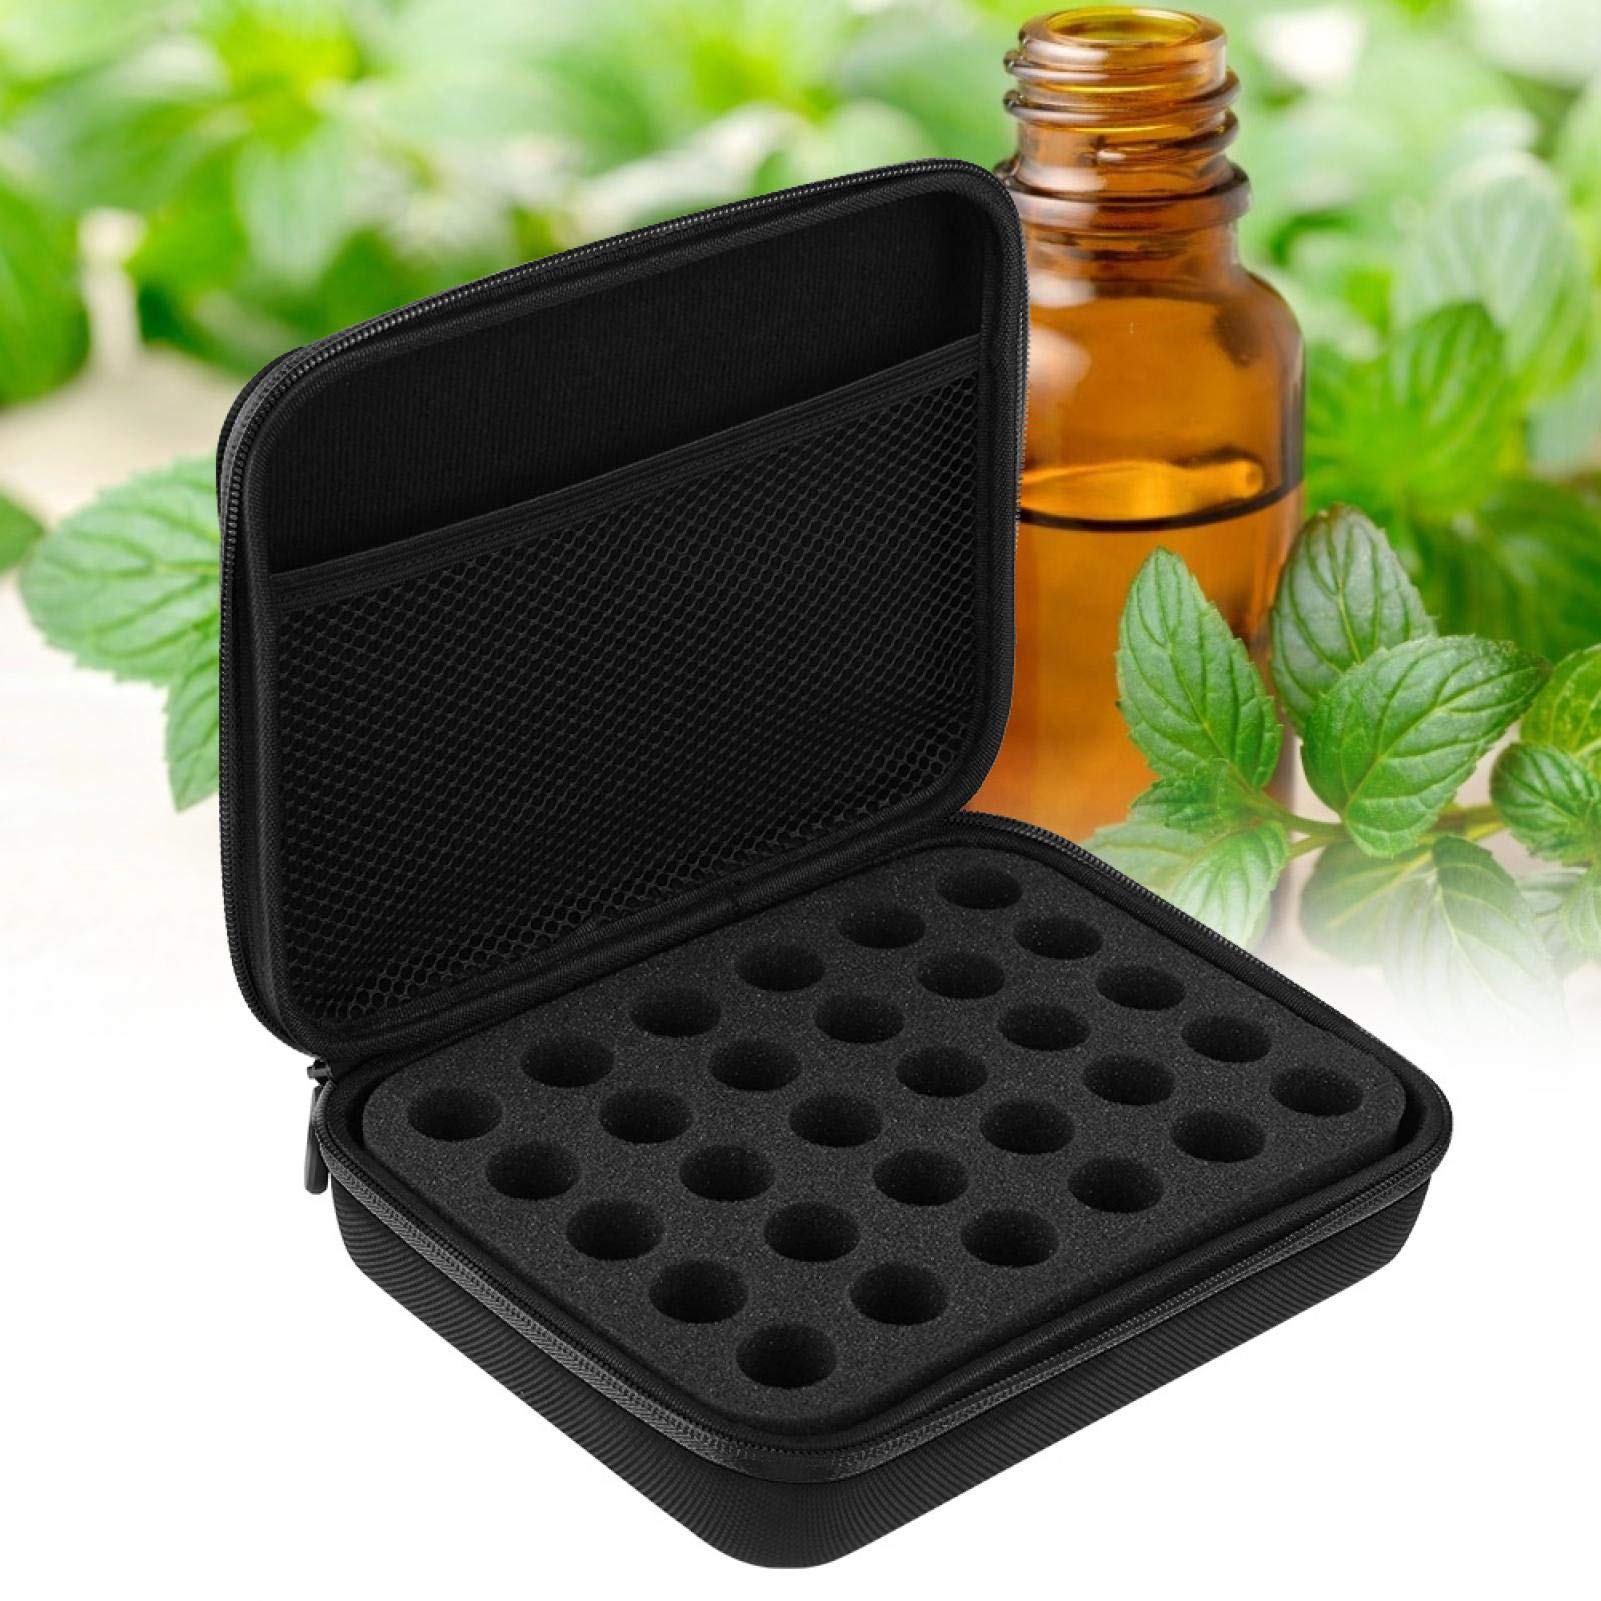 30-Bottle Essential Oil Carrying Case for 5ml,10ml,15ml with Handle Scented Oils Holder Traveling Carrying Case Storage Box(Black)